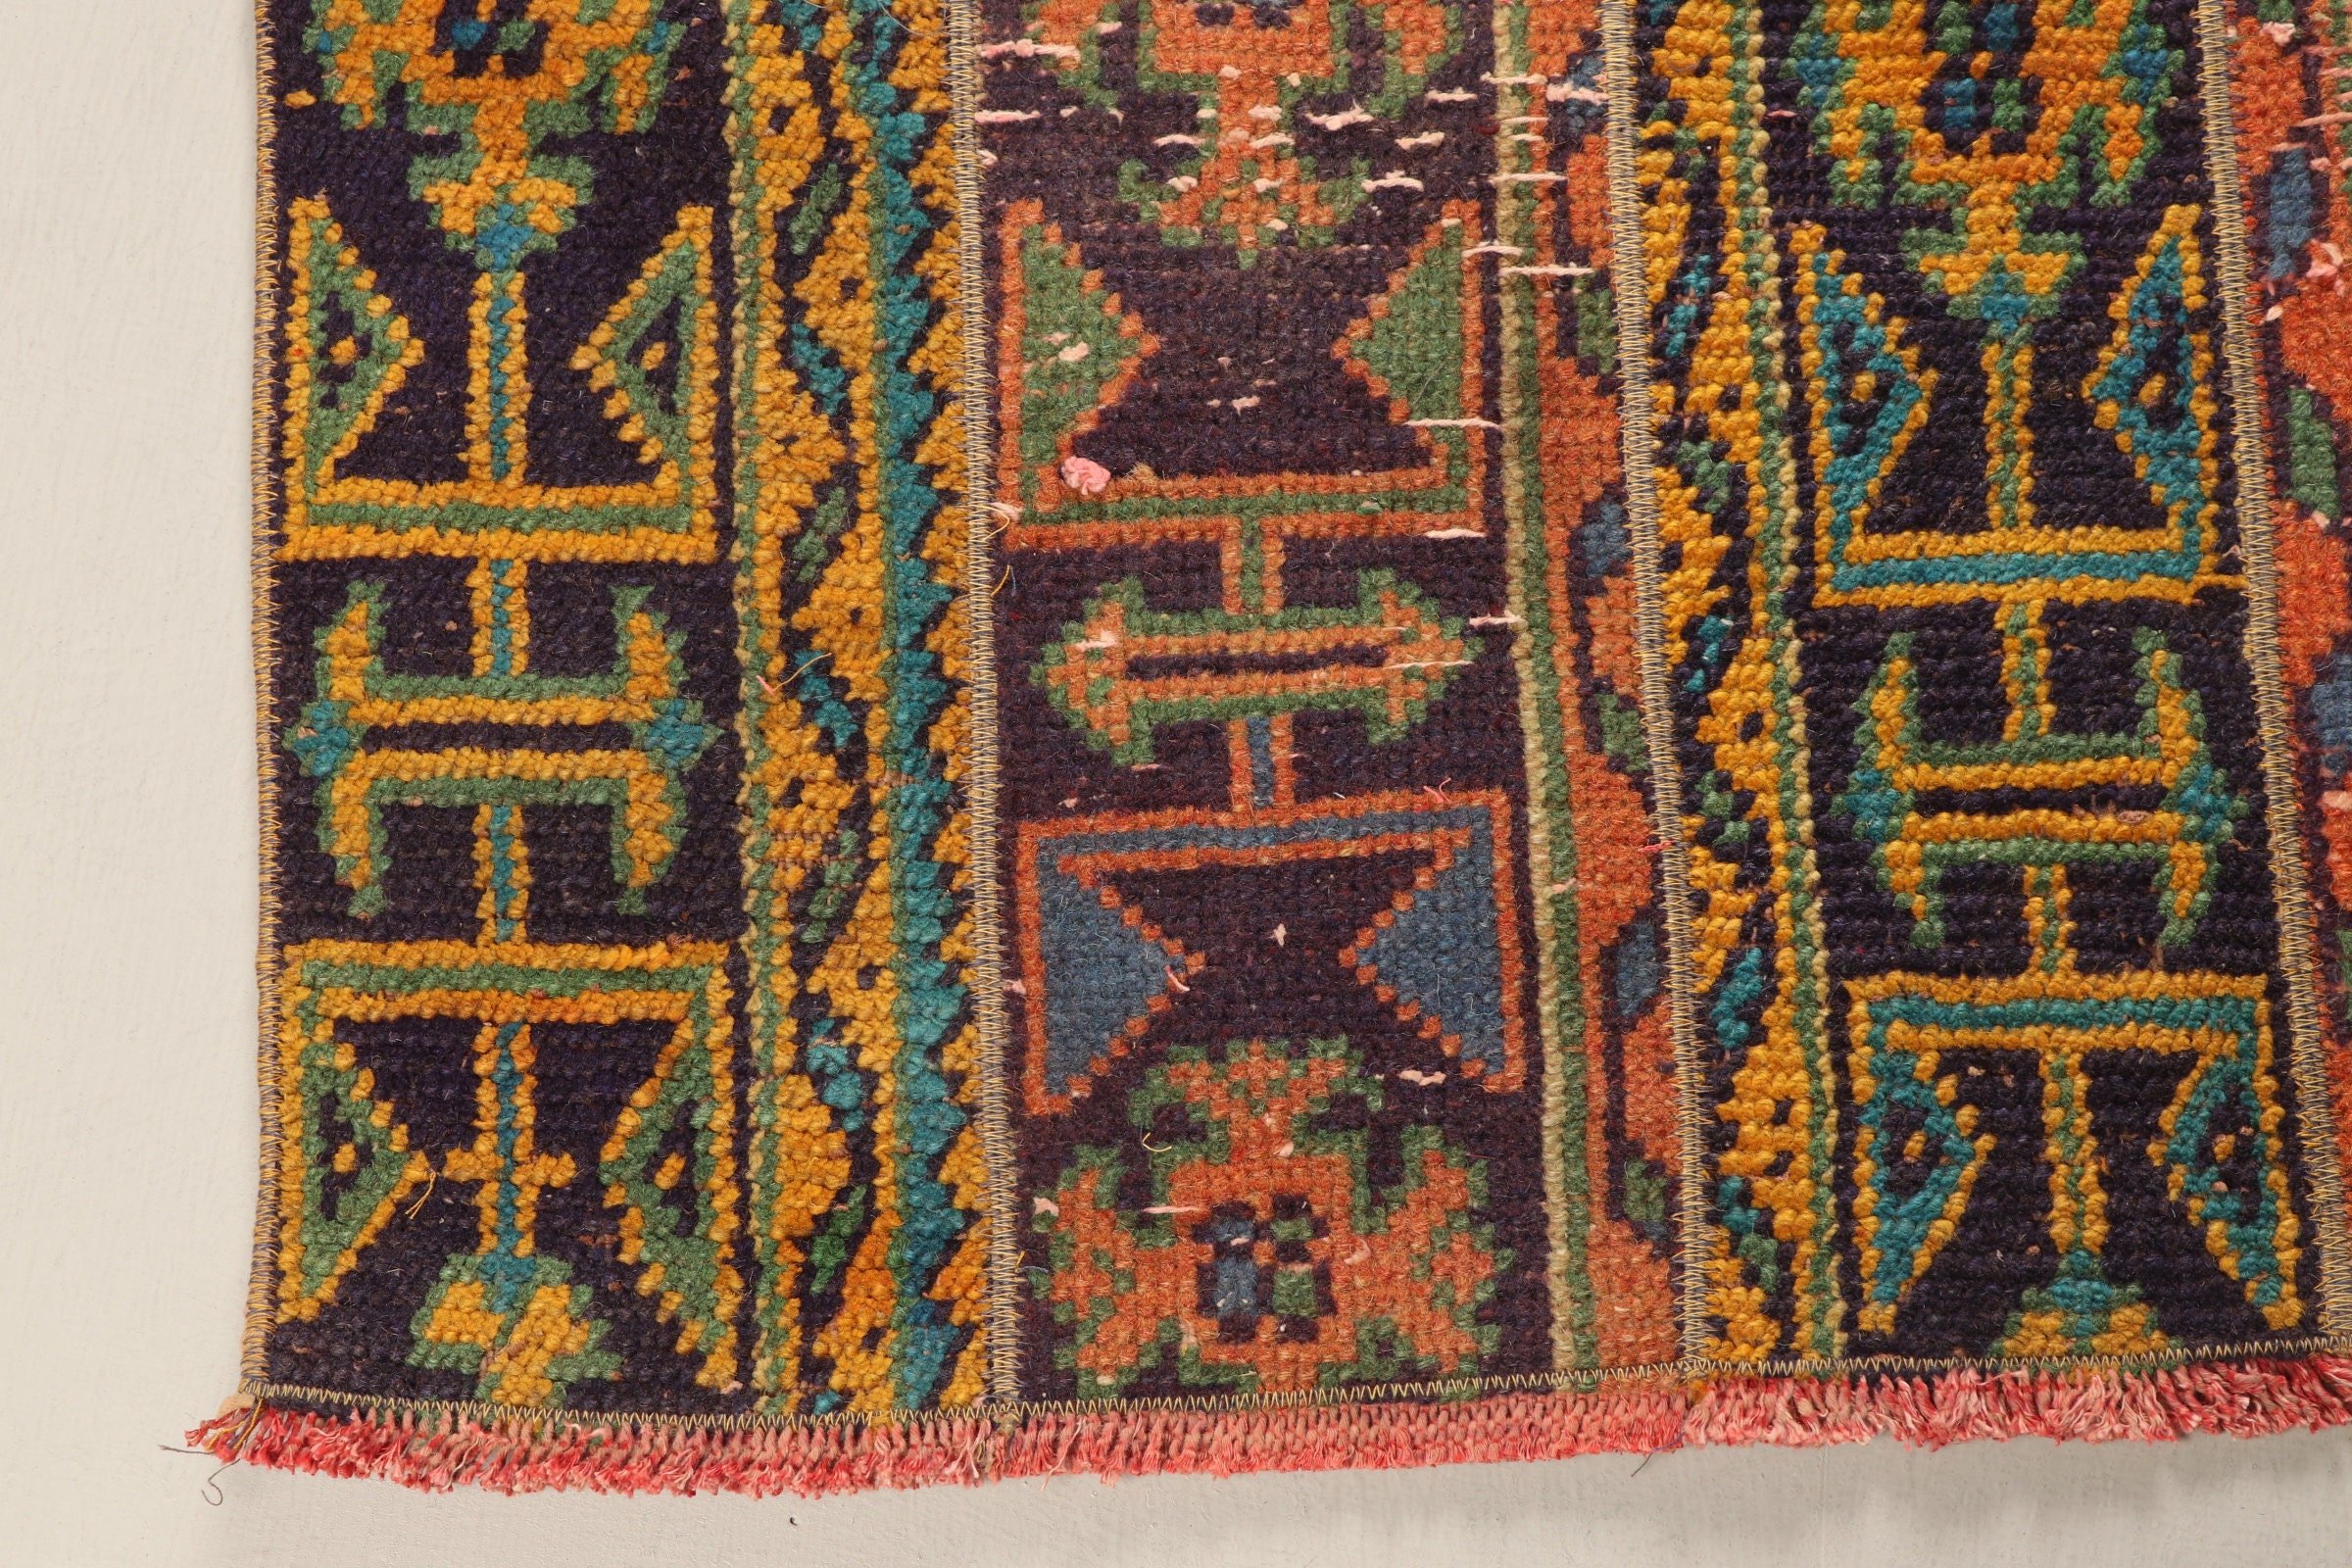 Vintage Rugs, Bronze Home Decor Rugs, 2.4x4.9 ft Small Rug, Entry Rugs, Cool Rug, Moroccan Rug, Rugs for Bath, Kitchen Rug, Turkish Rug